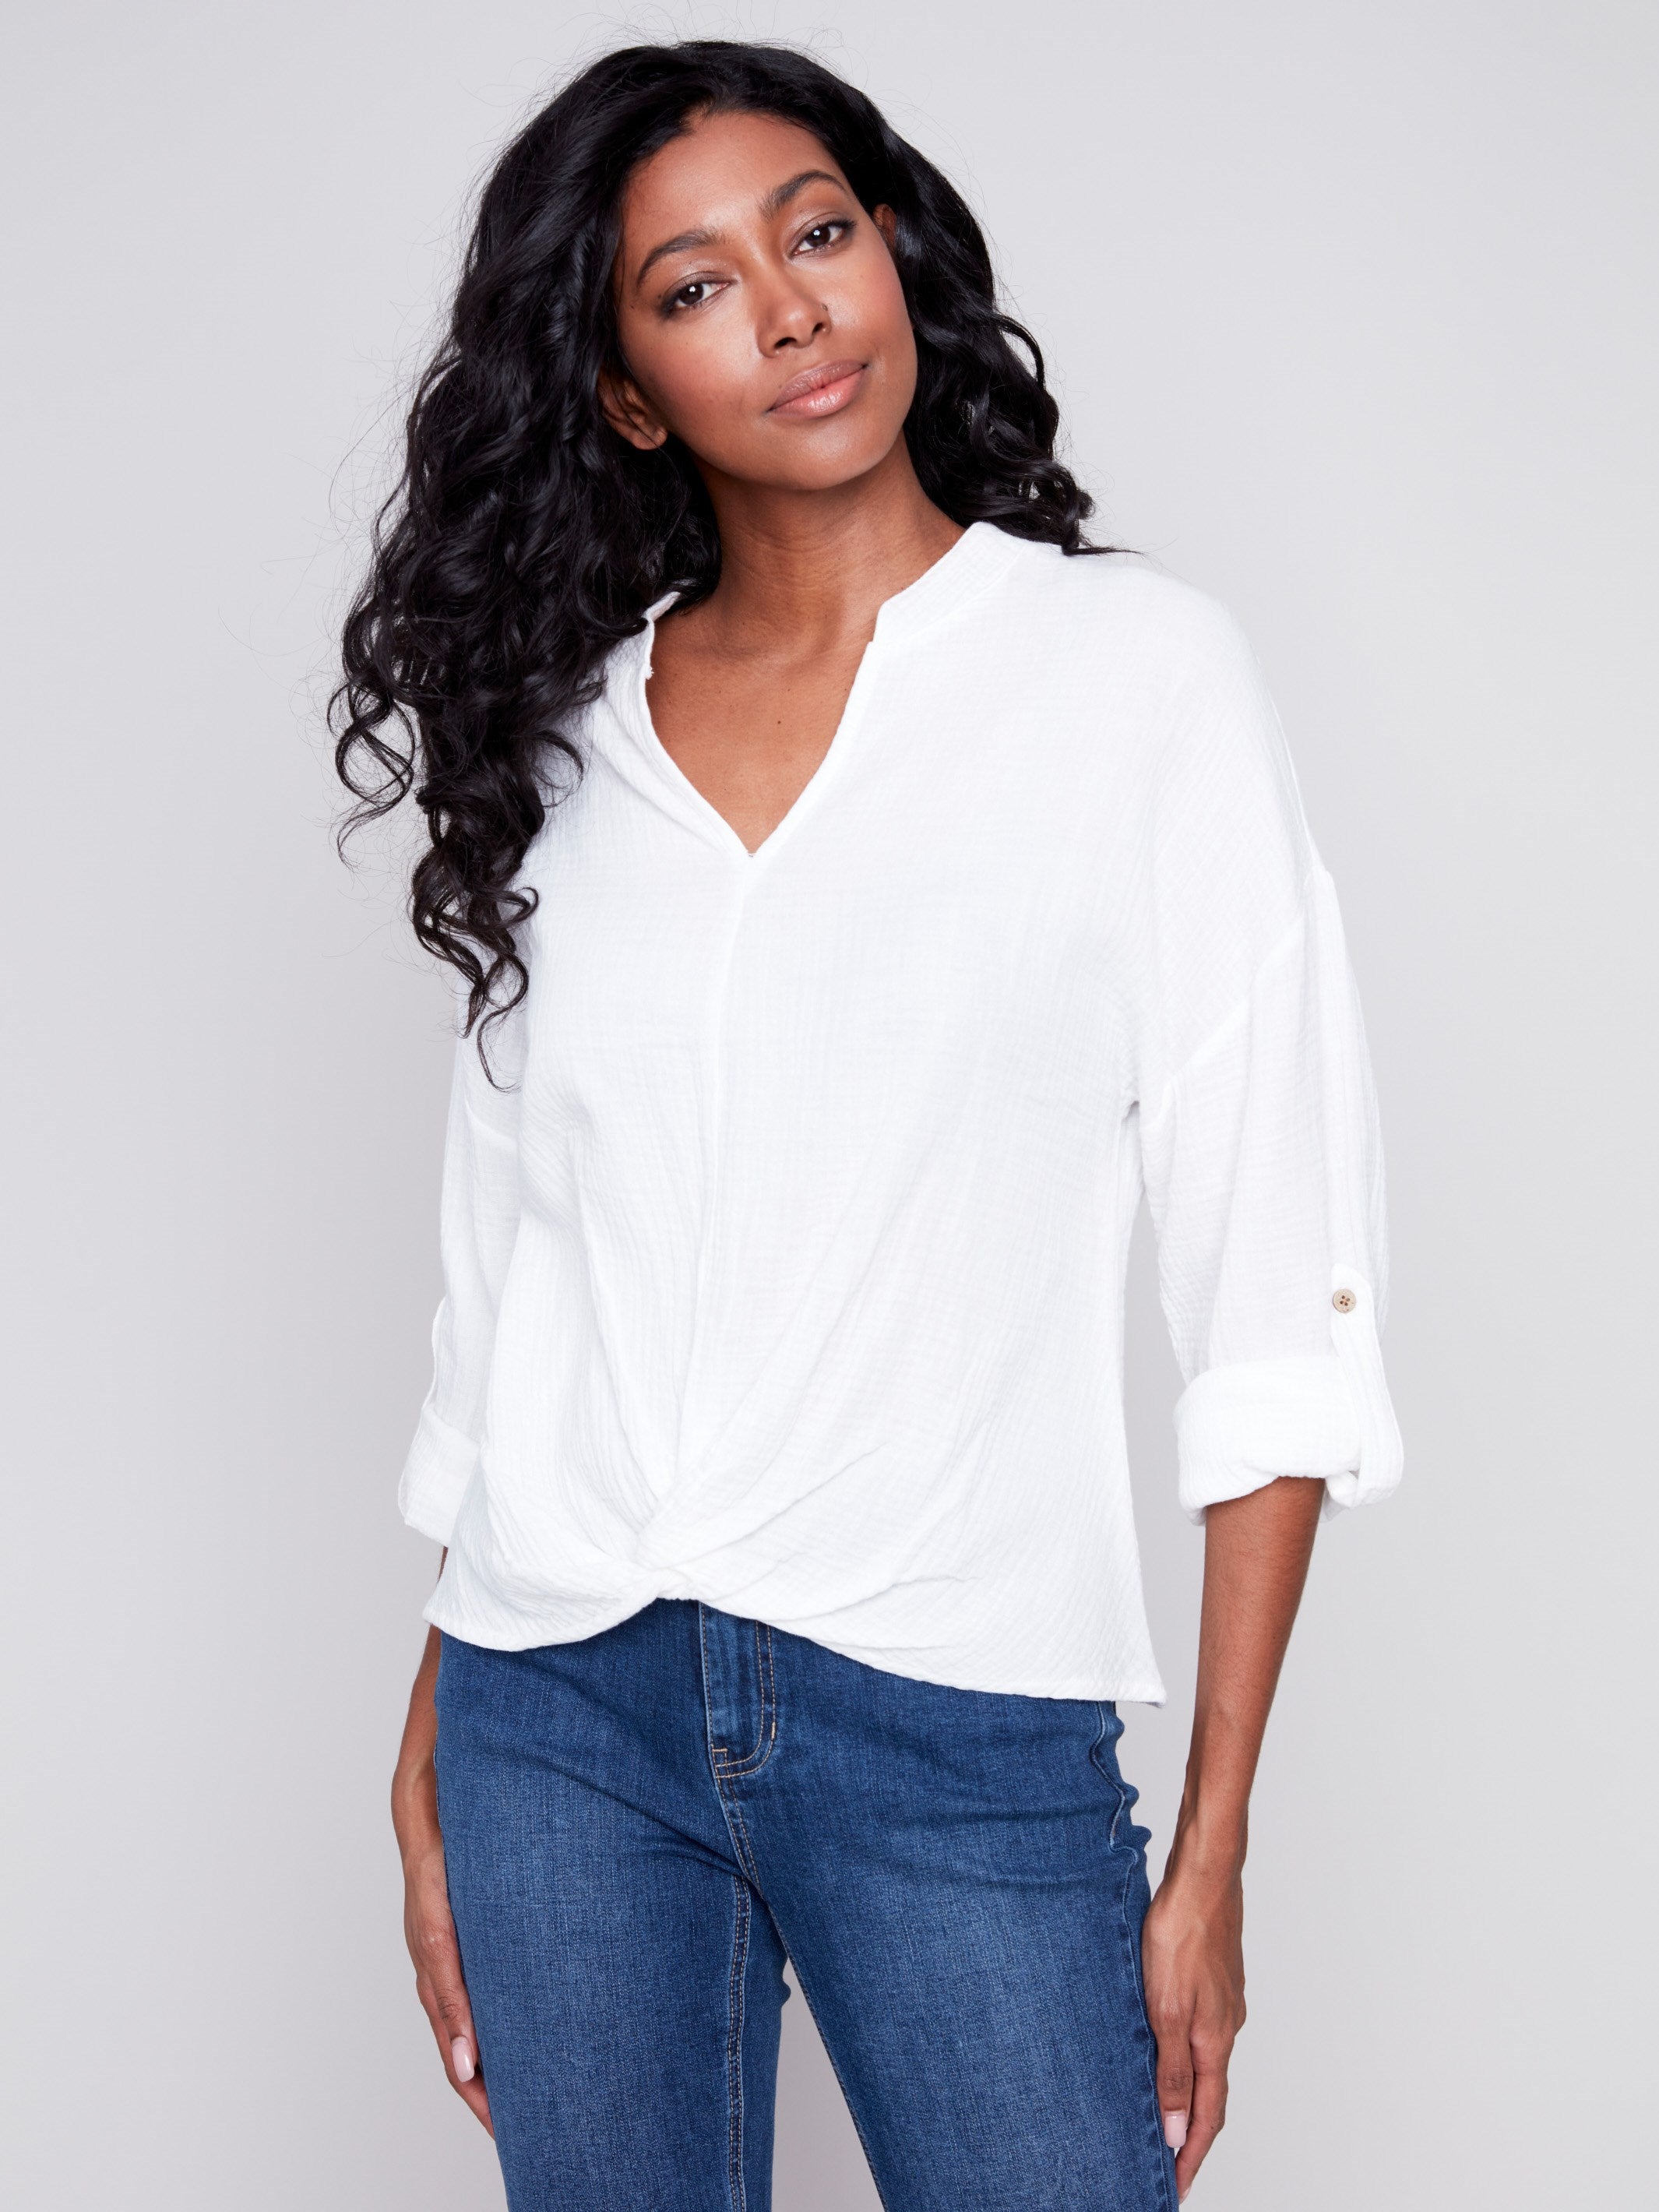 Bubble Cotton Blouse with Front Twist - White - Charlie B Collection Canada - Image 4